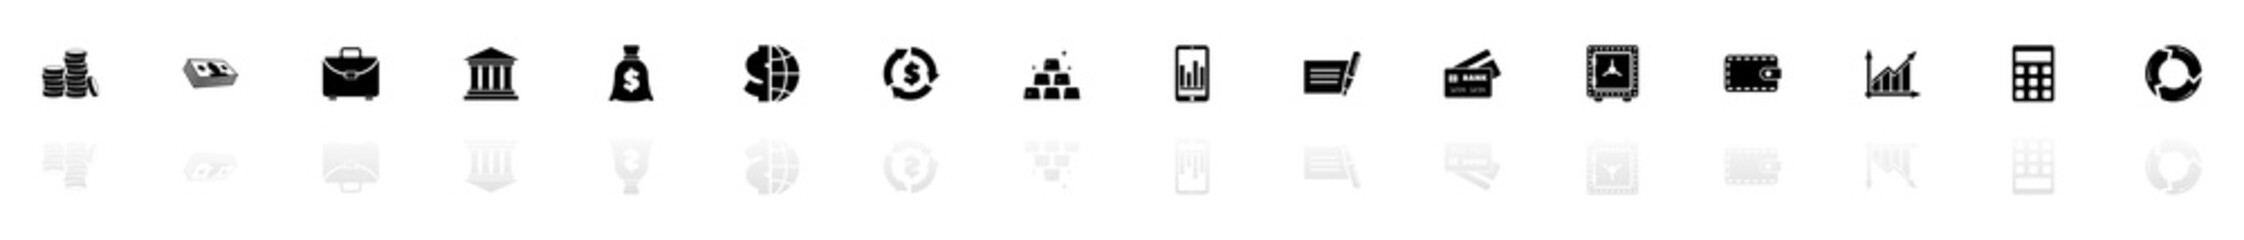 Financical icons - Black horizontal Illustration symbol on White Background with a mirror Shadow reflection. Flat Vector Icon.